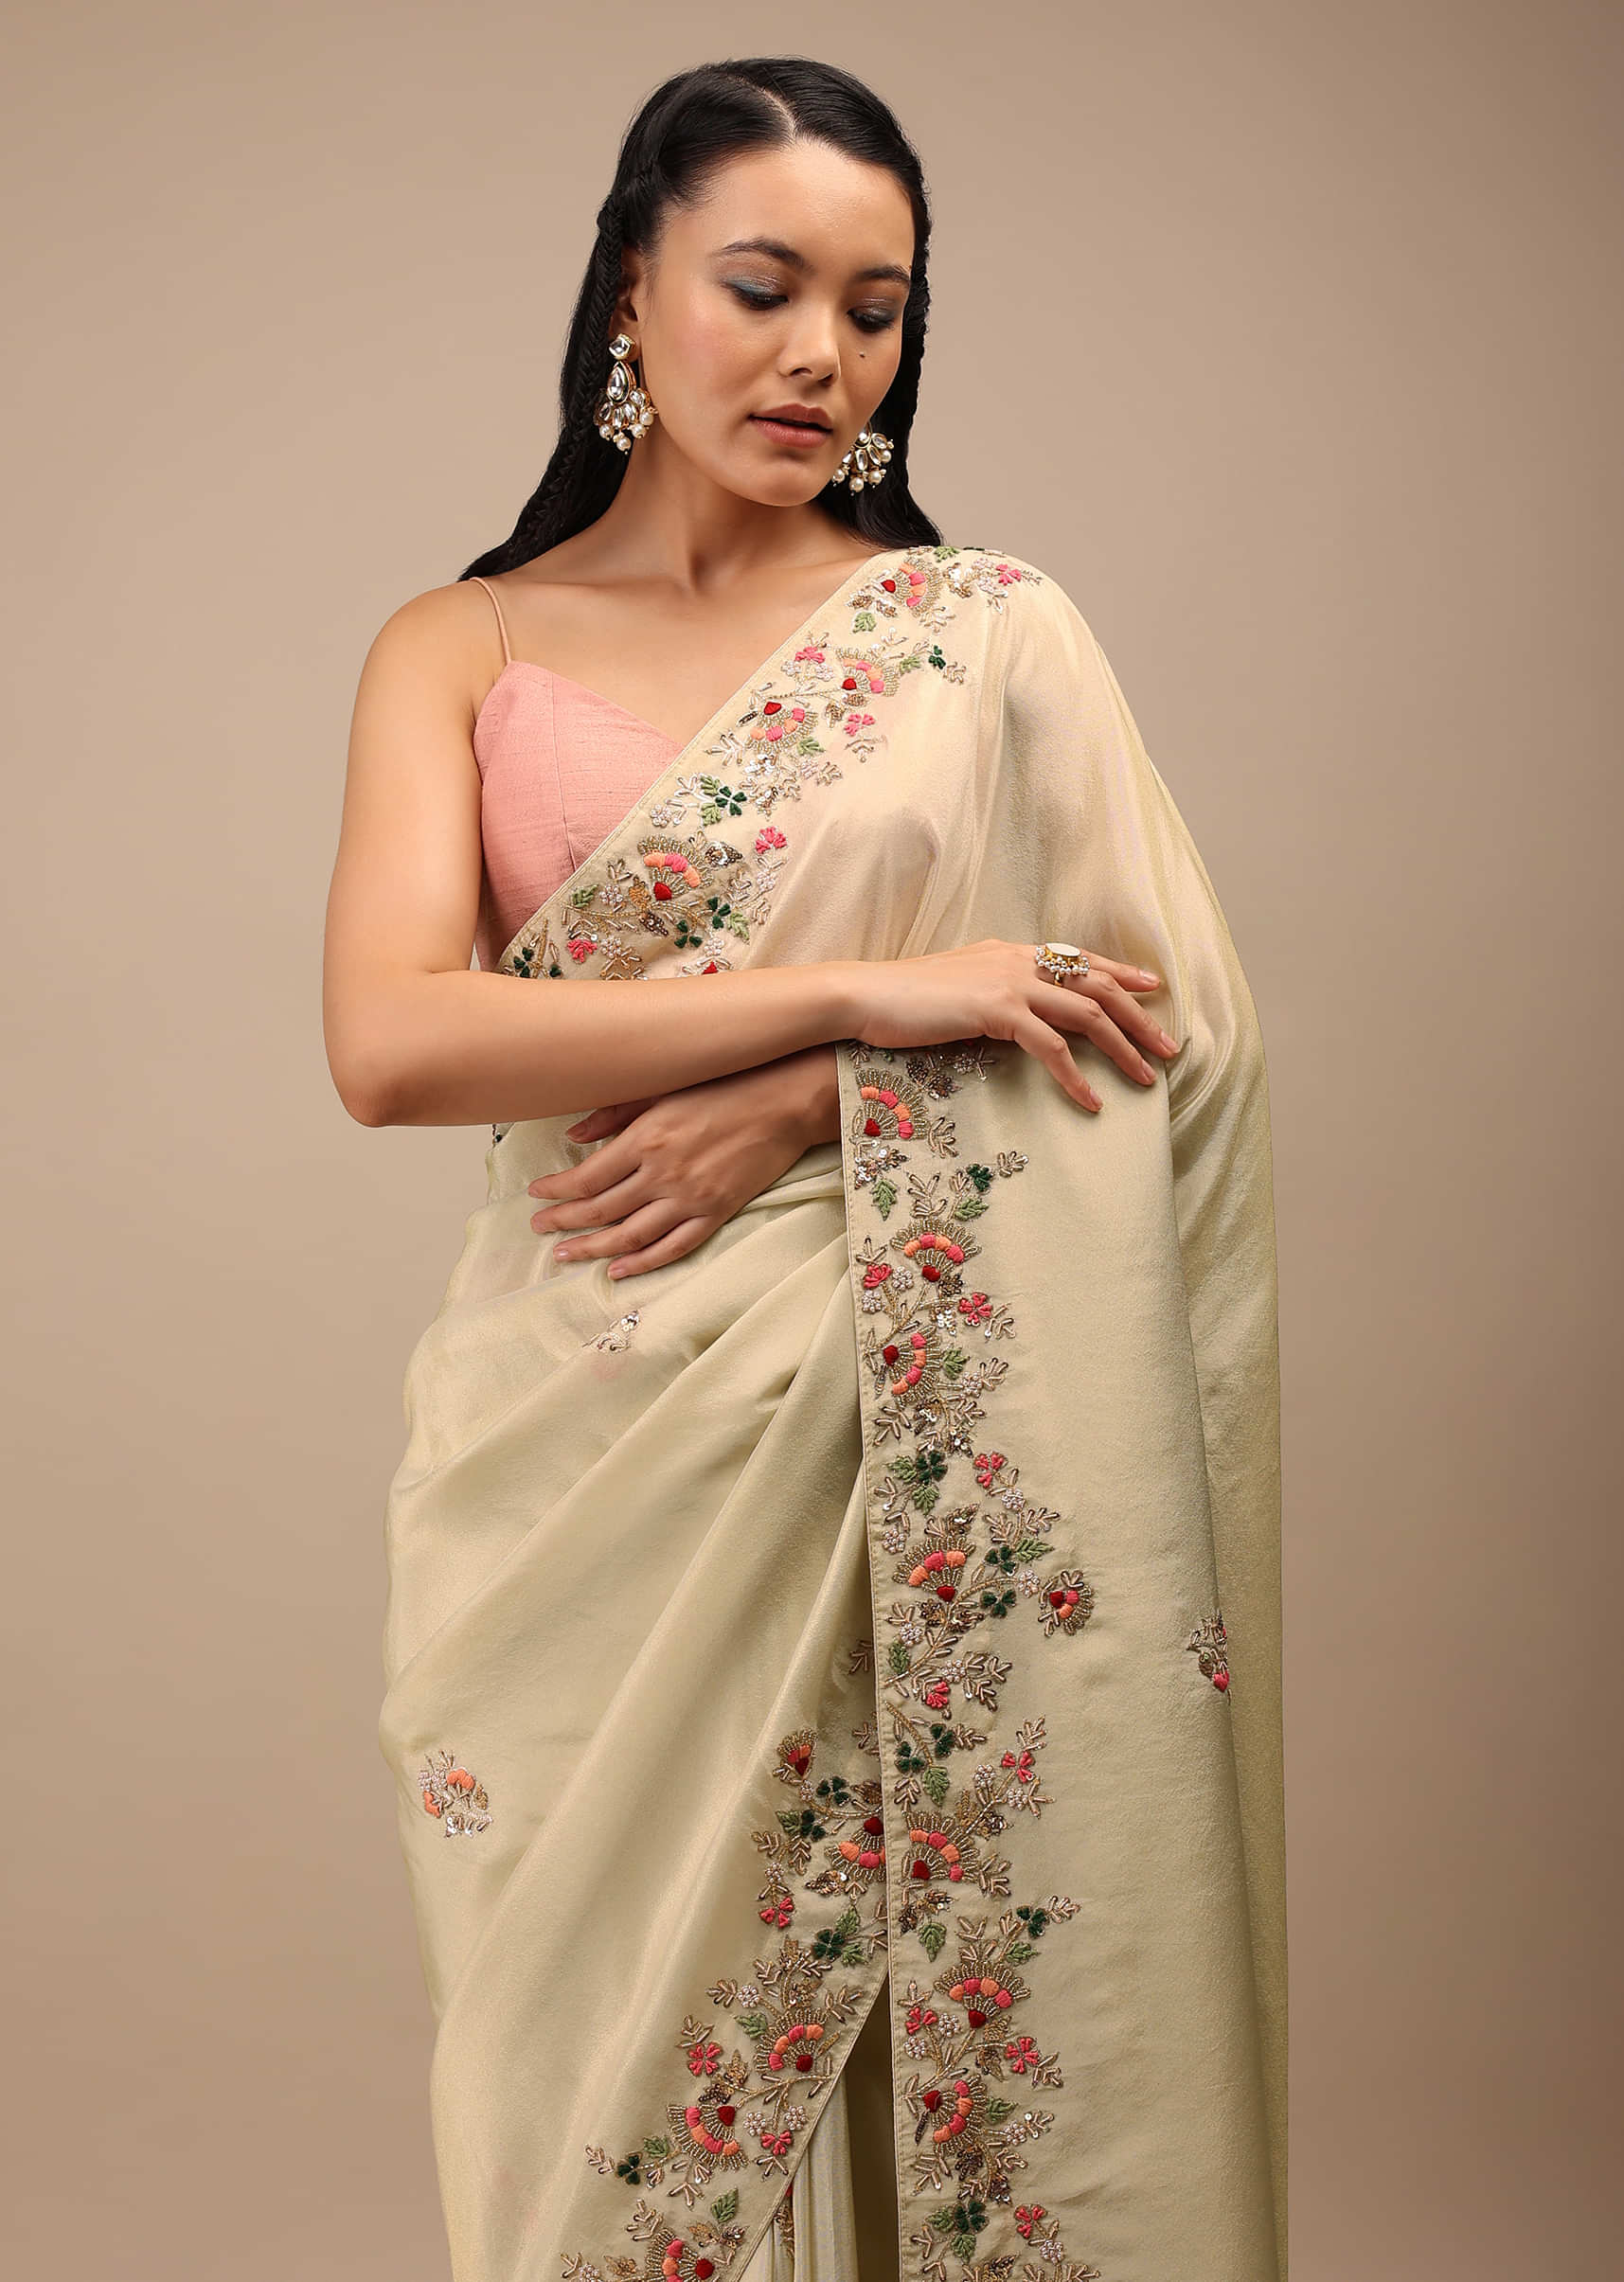 Off-White Shimmer Saree In Pink And Coral Resham Embroidery On The Border, Crafted In Shimmer With Floral Embroidery Buttis